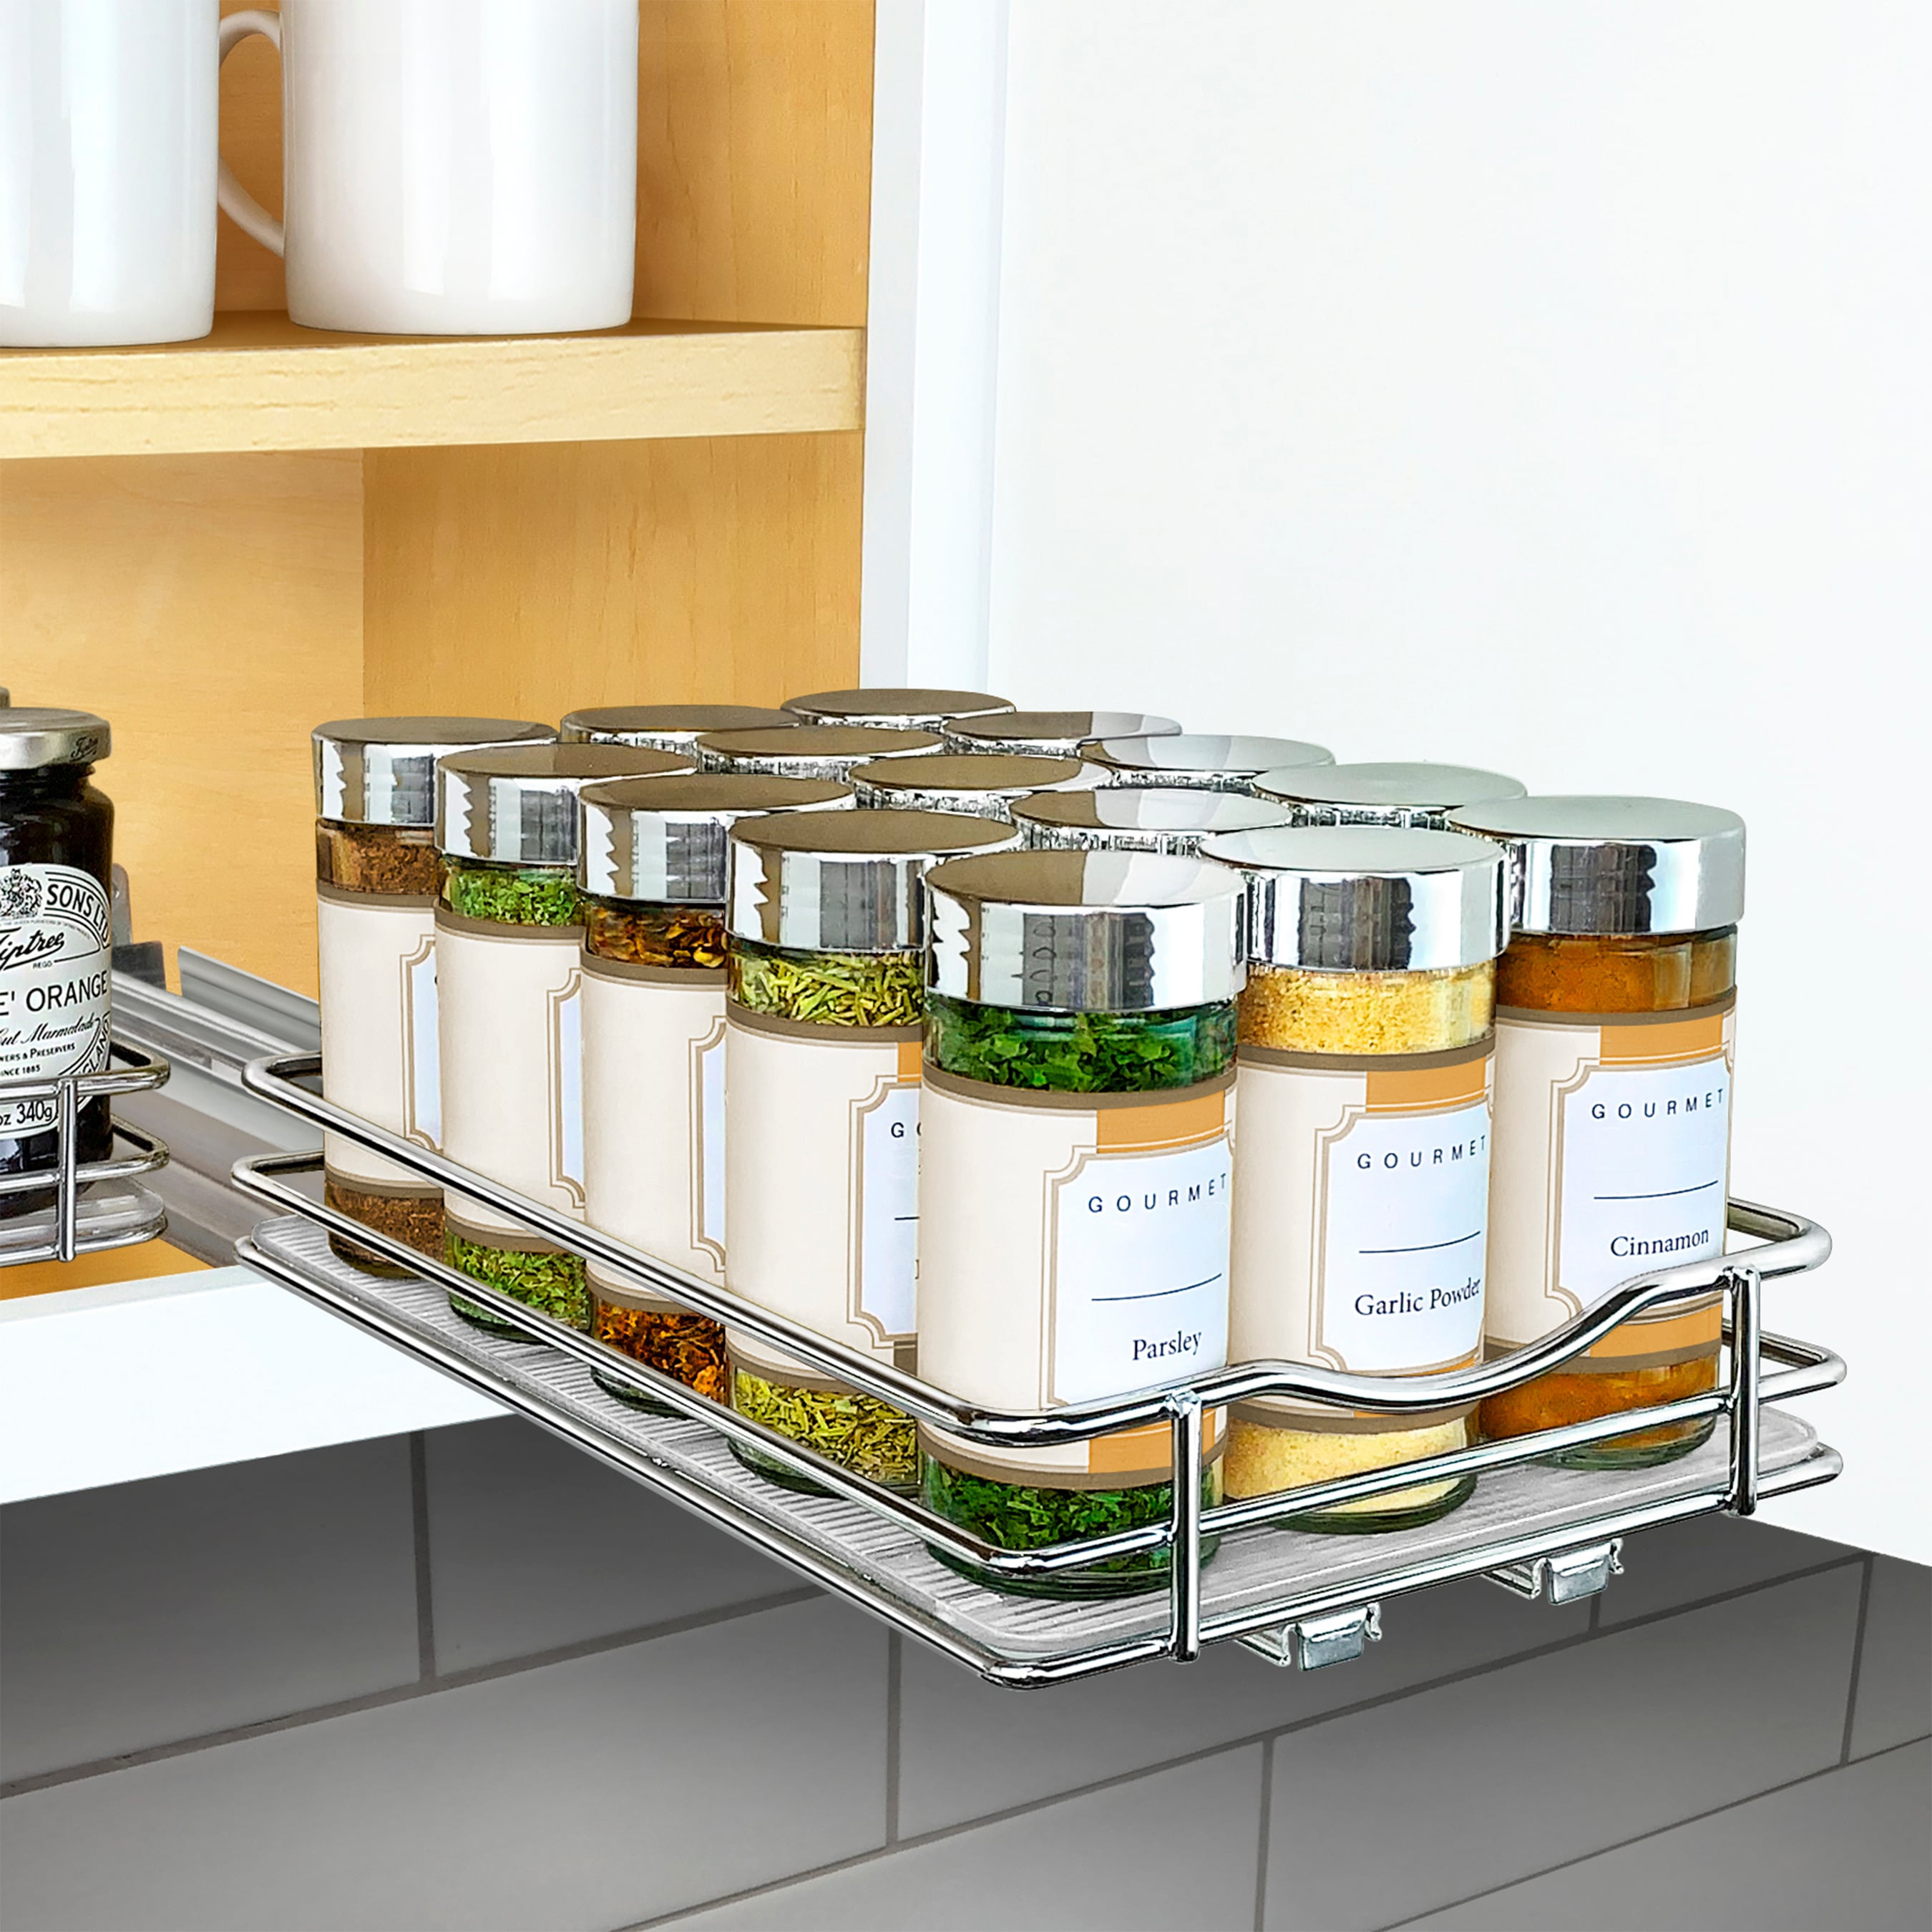 Cabinet Caddy Snap! Sliding Spice Rack Organizer for Cabinet, Just Pull & Rotate, 3 Snap-In Shelves Adjust for 5 Levels of Storage, Magnetic Modular